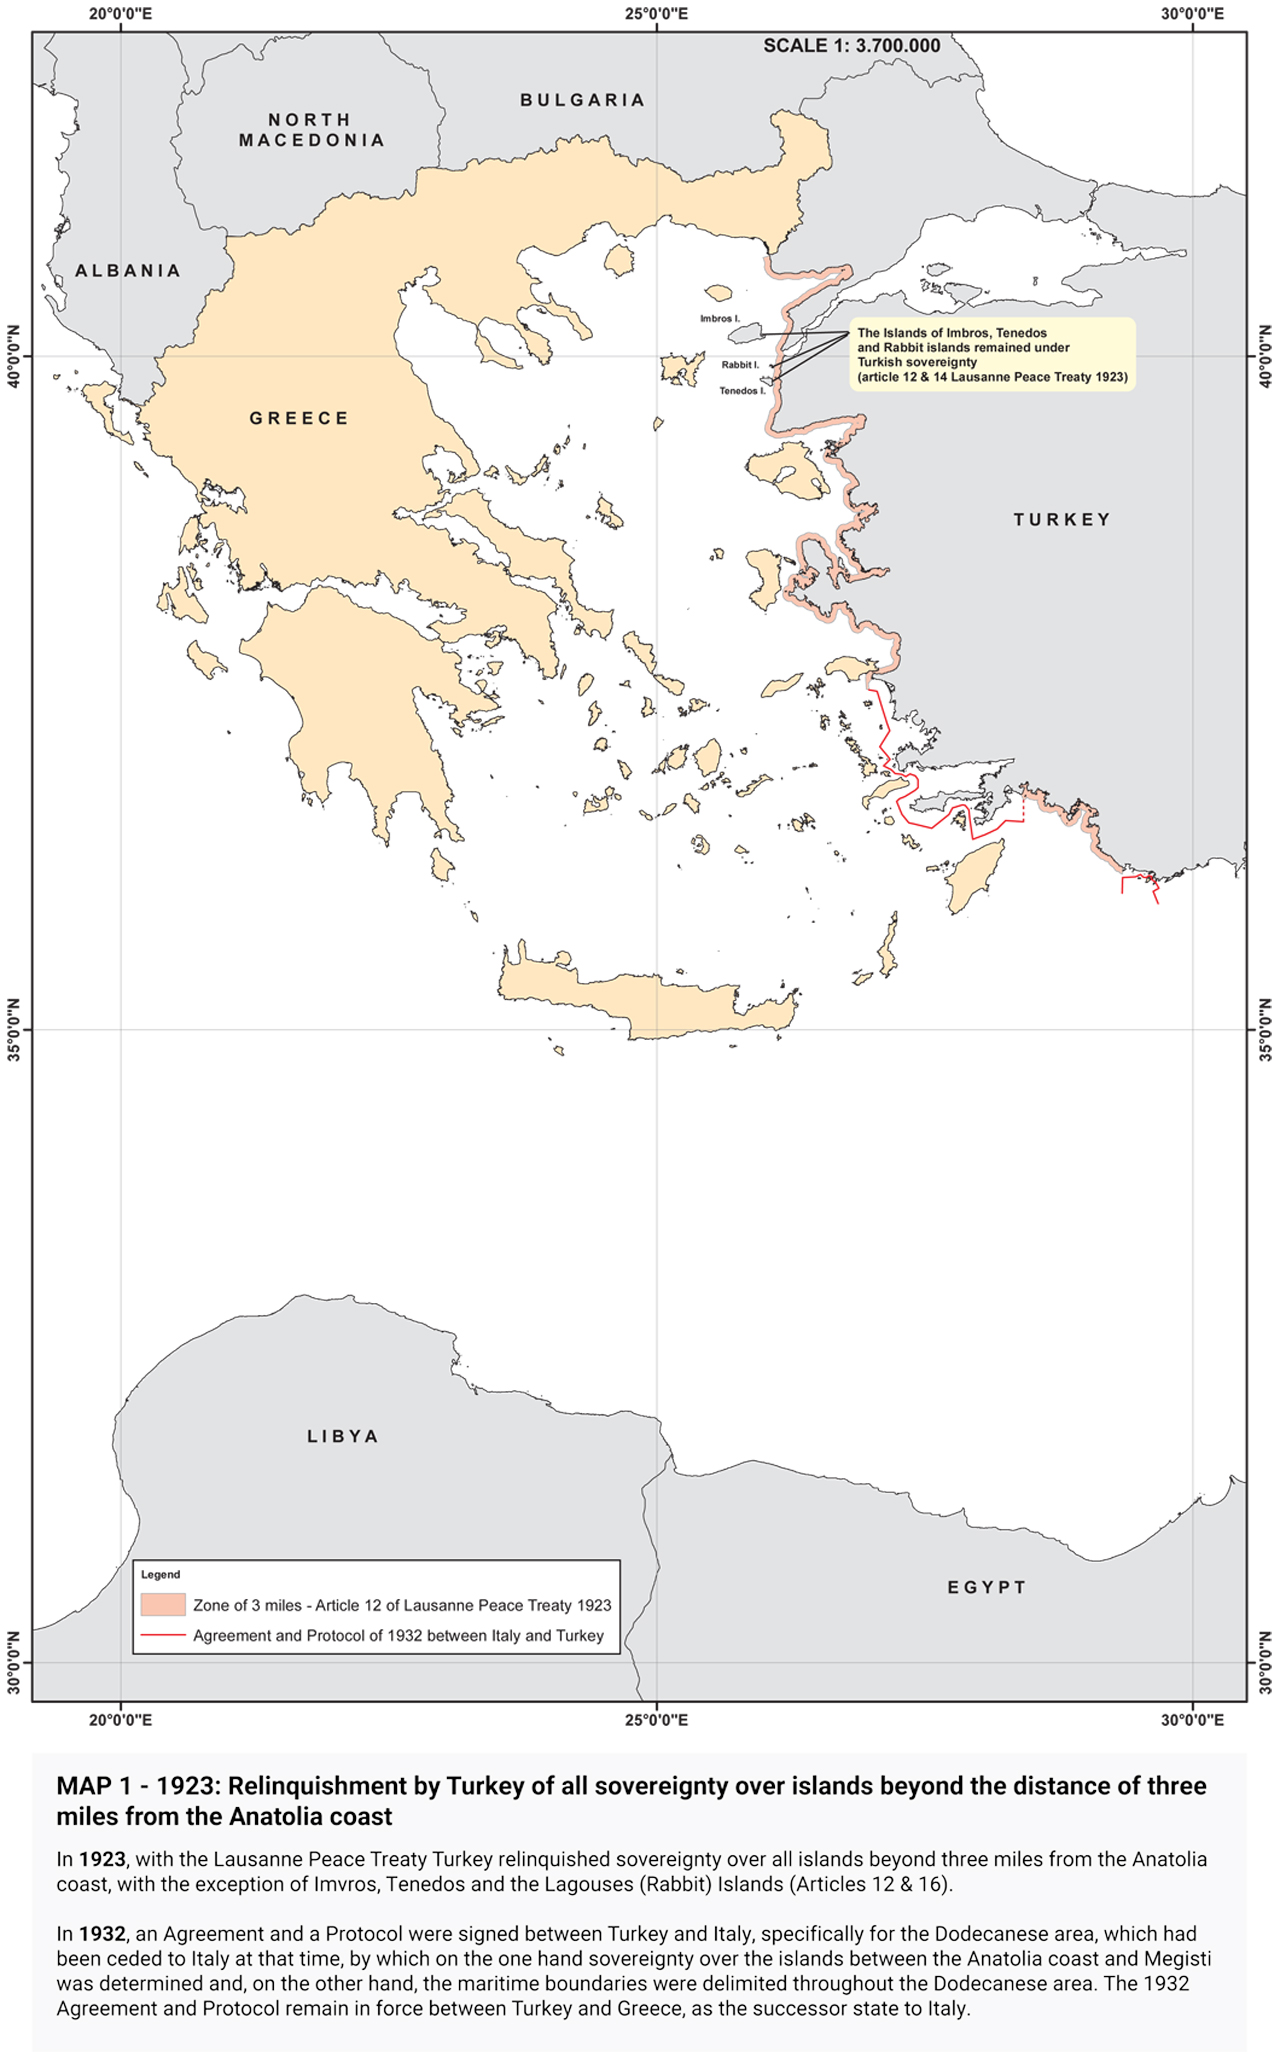 greece-responds-to-turkish-claims-about-islands-with-maps1